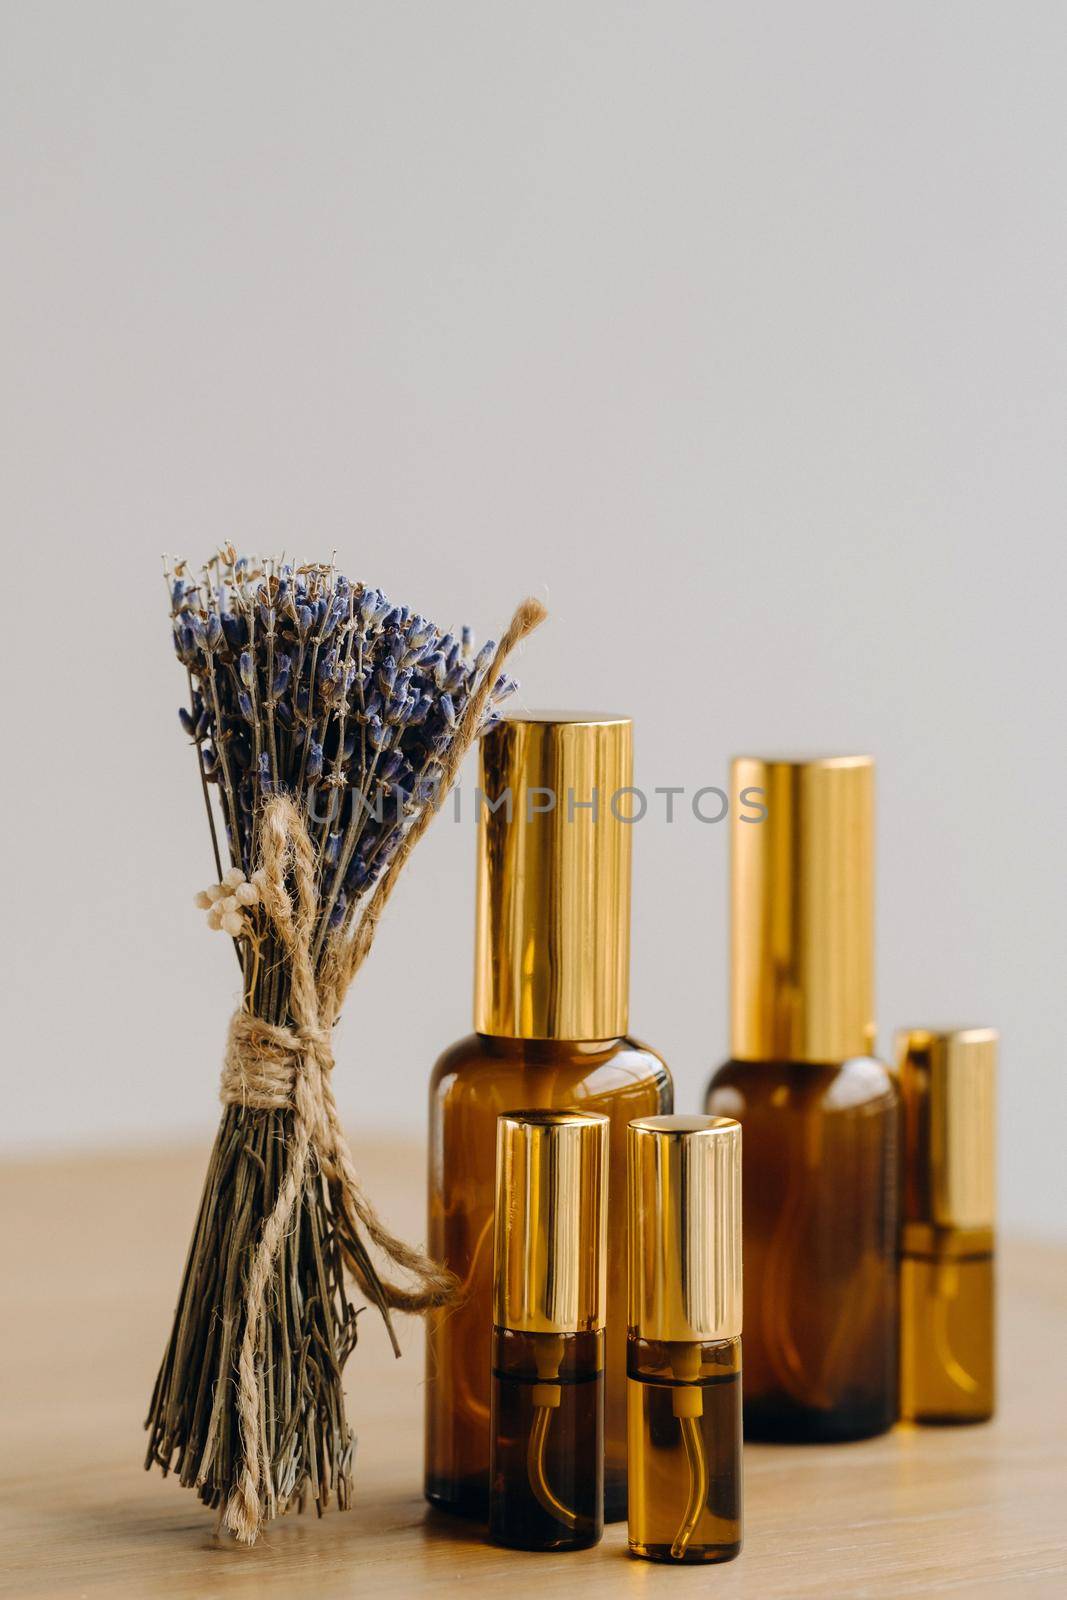 Essential oil in one bottle and dried lavender standing on the surface.